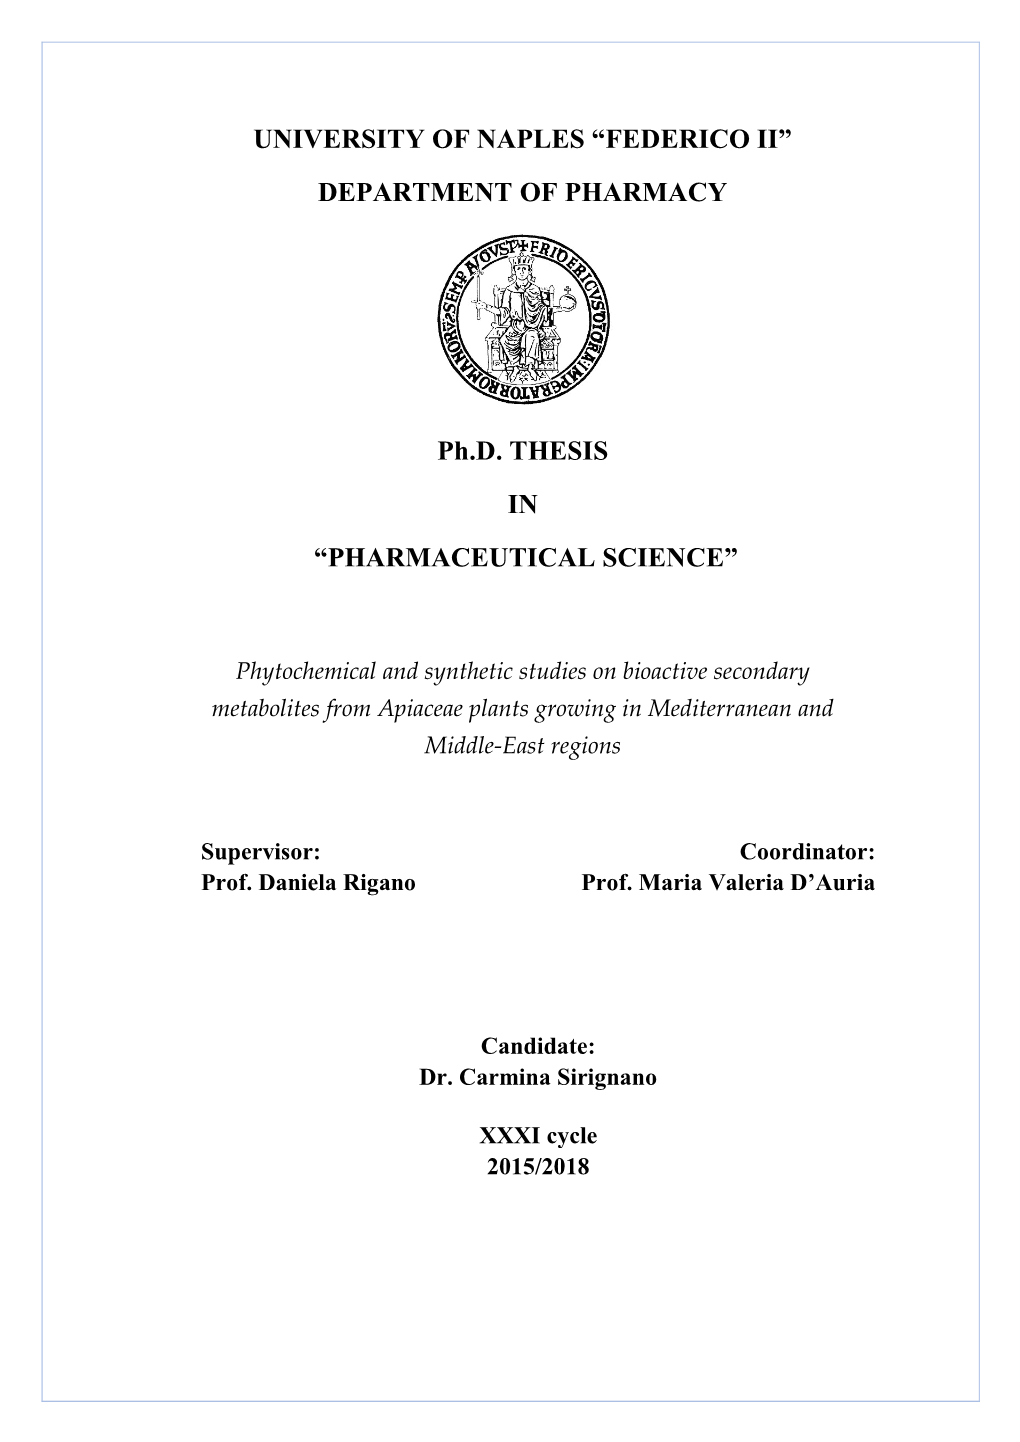 UNIVERSITY of NAPLES “FEDERICO II” DEPARTMENT of PHARMACY Ph.D. THESIS in “PHARMACEUTICAL SCIENCE”